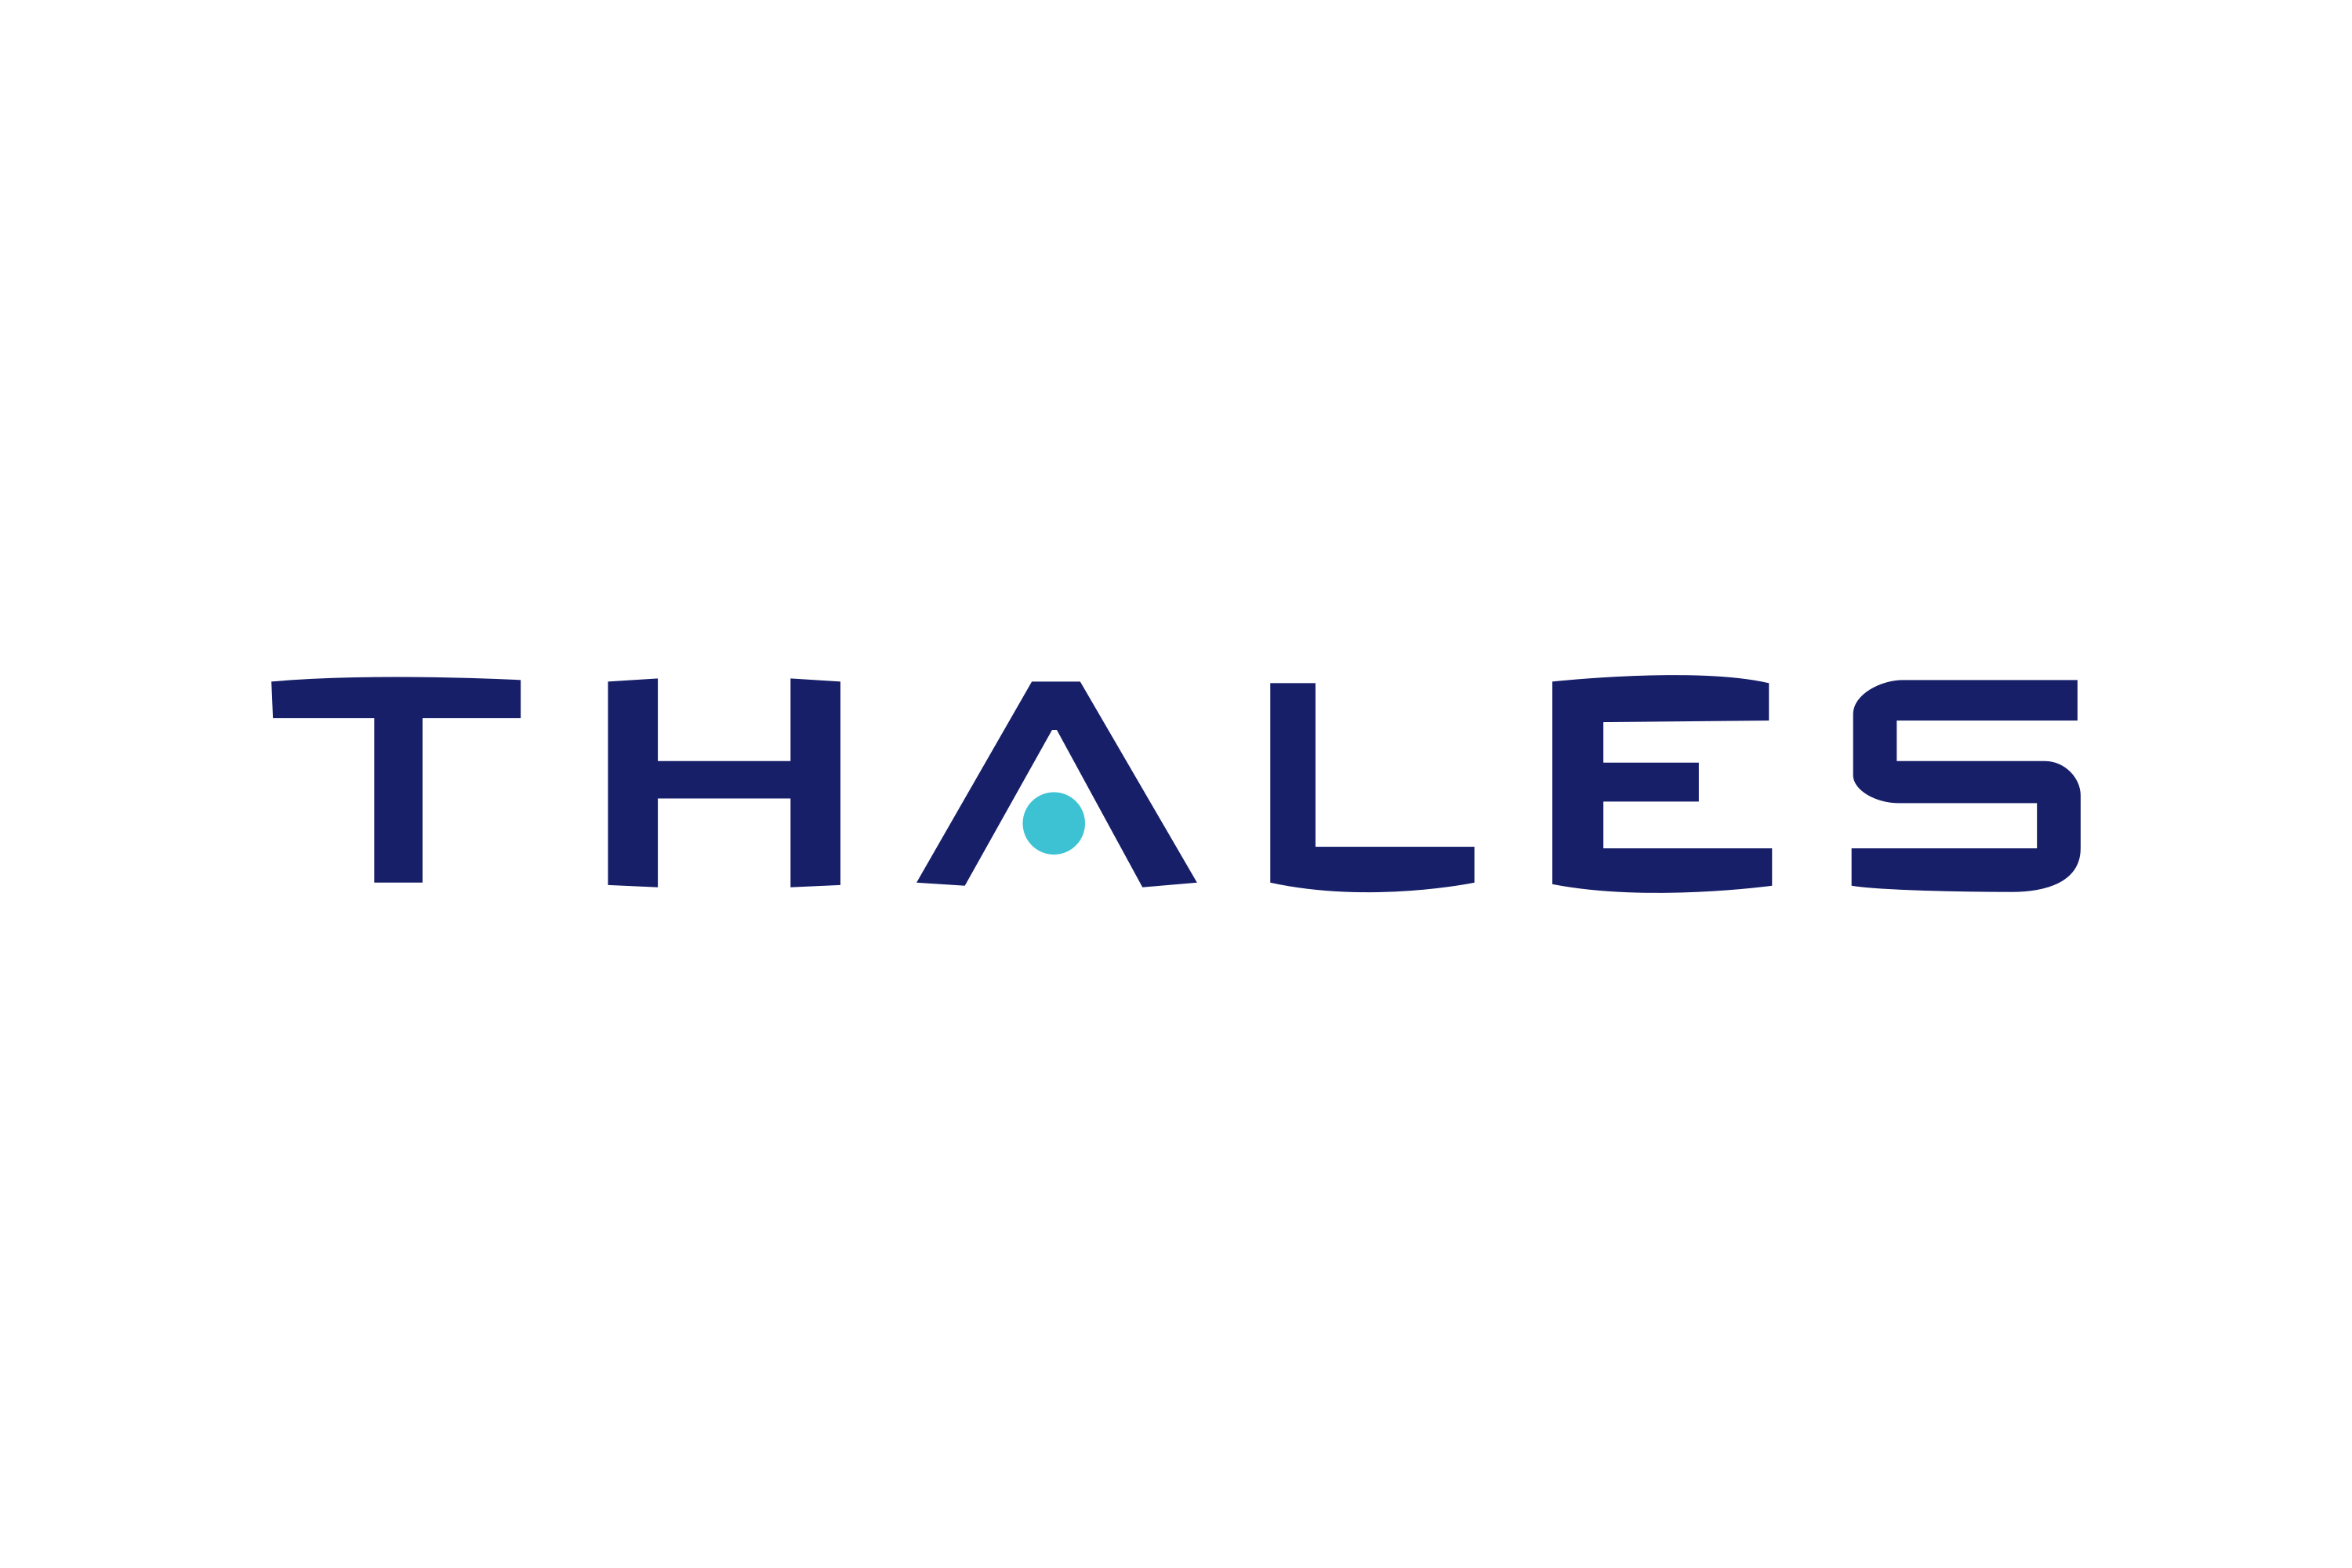 Download Thales Group Logo in SVG Vector or PNG File Format - Logo.wine